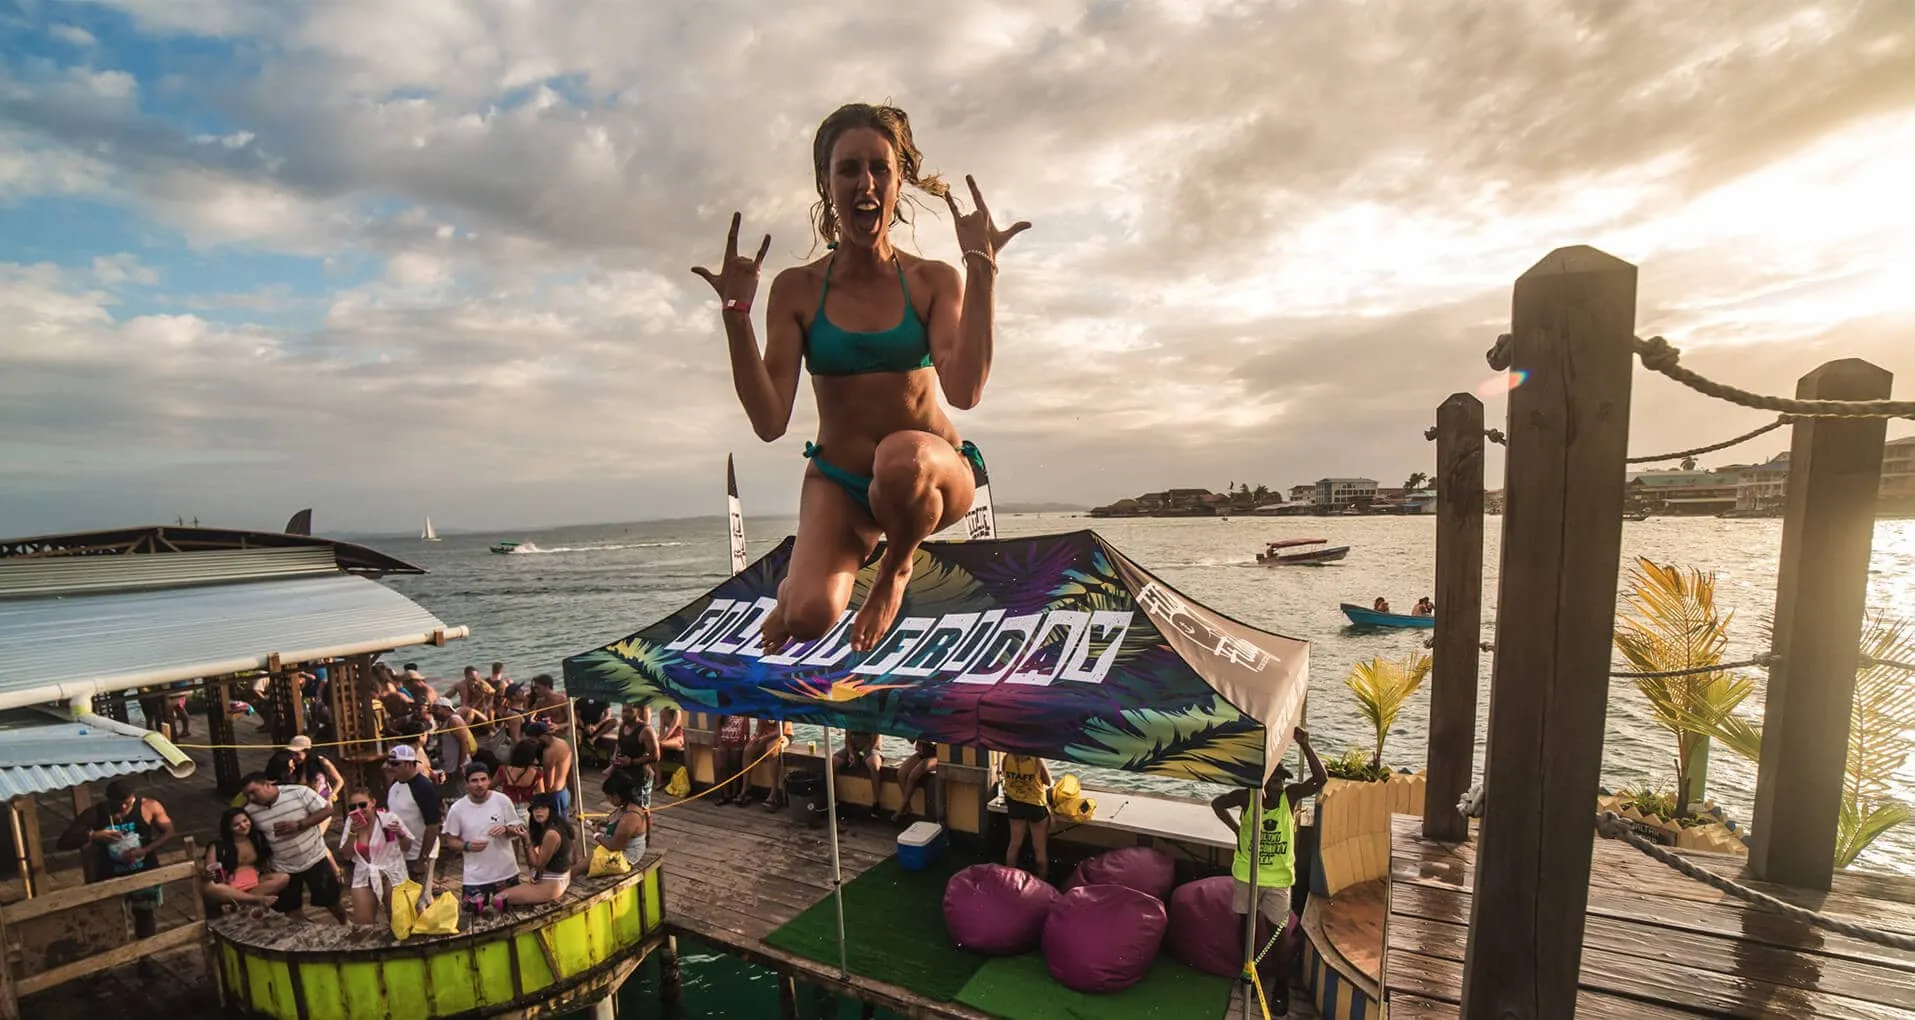 Filthy Friday Bocas in Panama, North America | Day and Beach Clubs - Rated 4